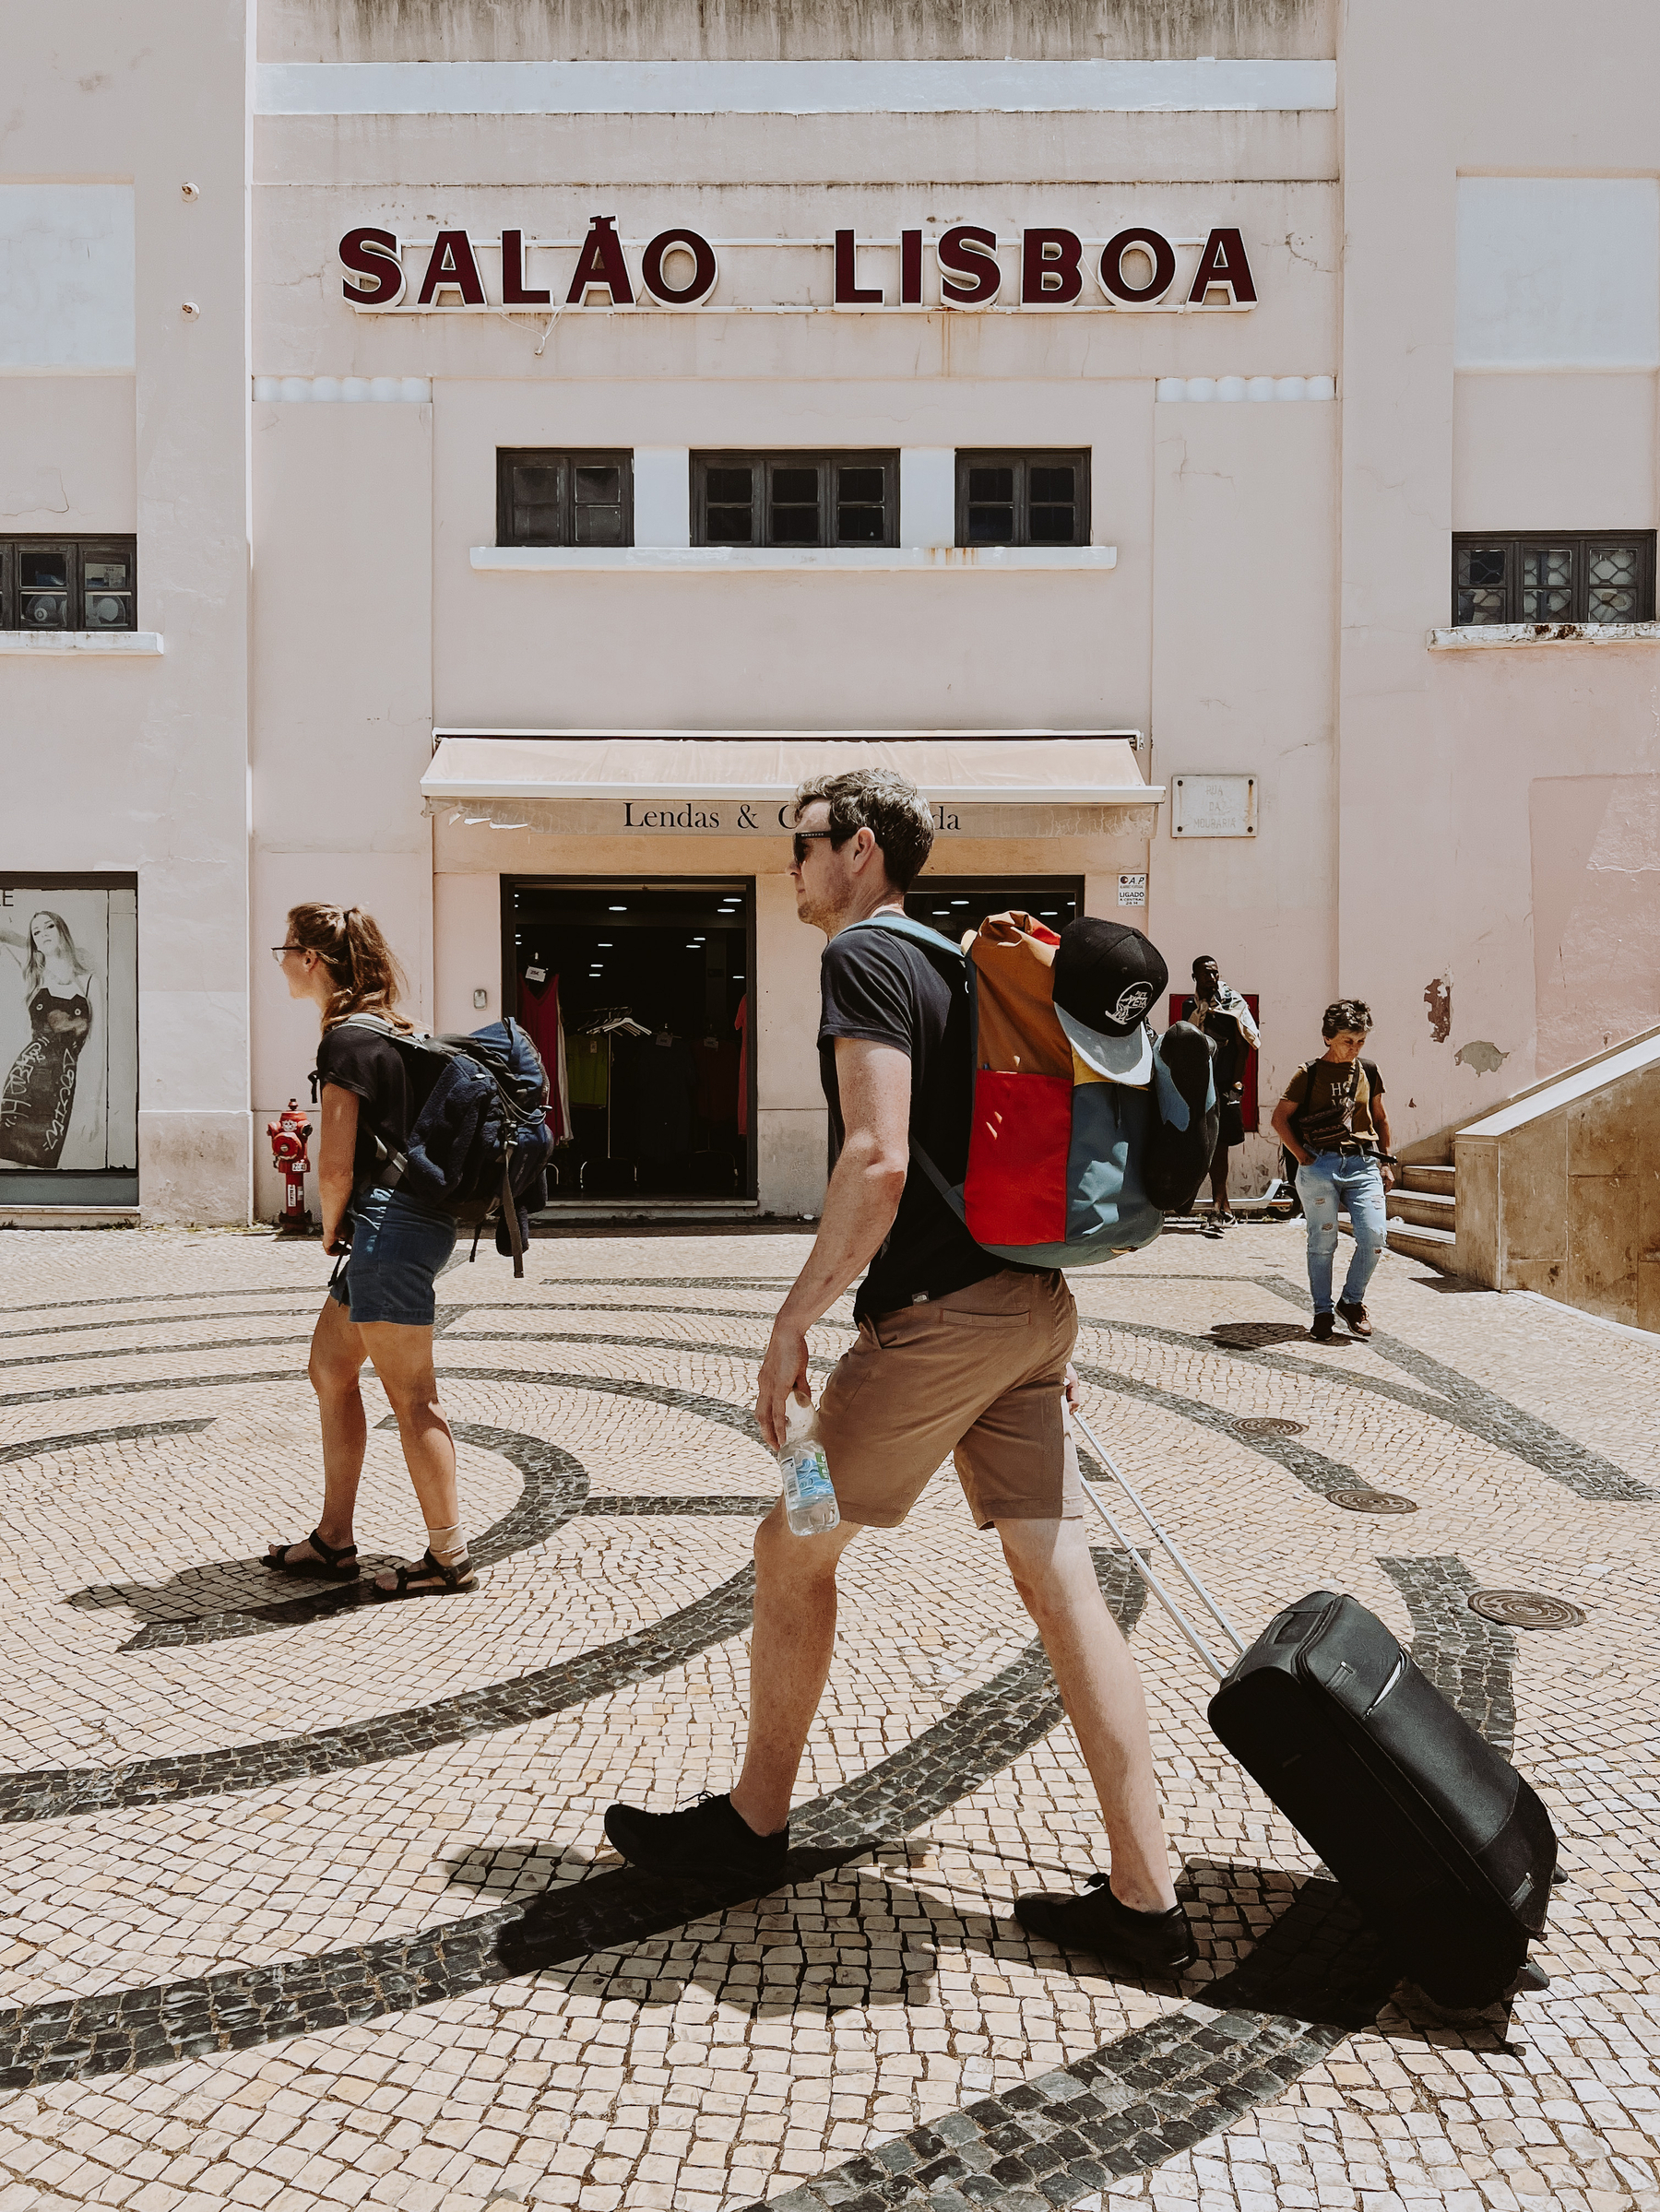 Tourists walk by, in front of a building that has the words “Salão Lisboa” on the facade. Both have backpacks, one ia also pulling a trolley. 